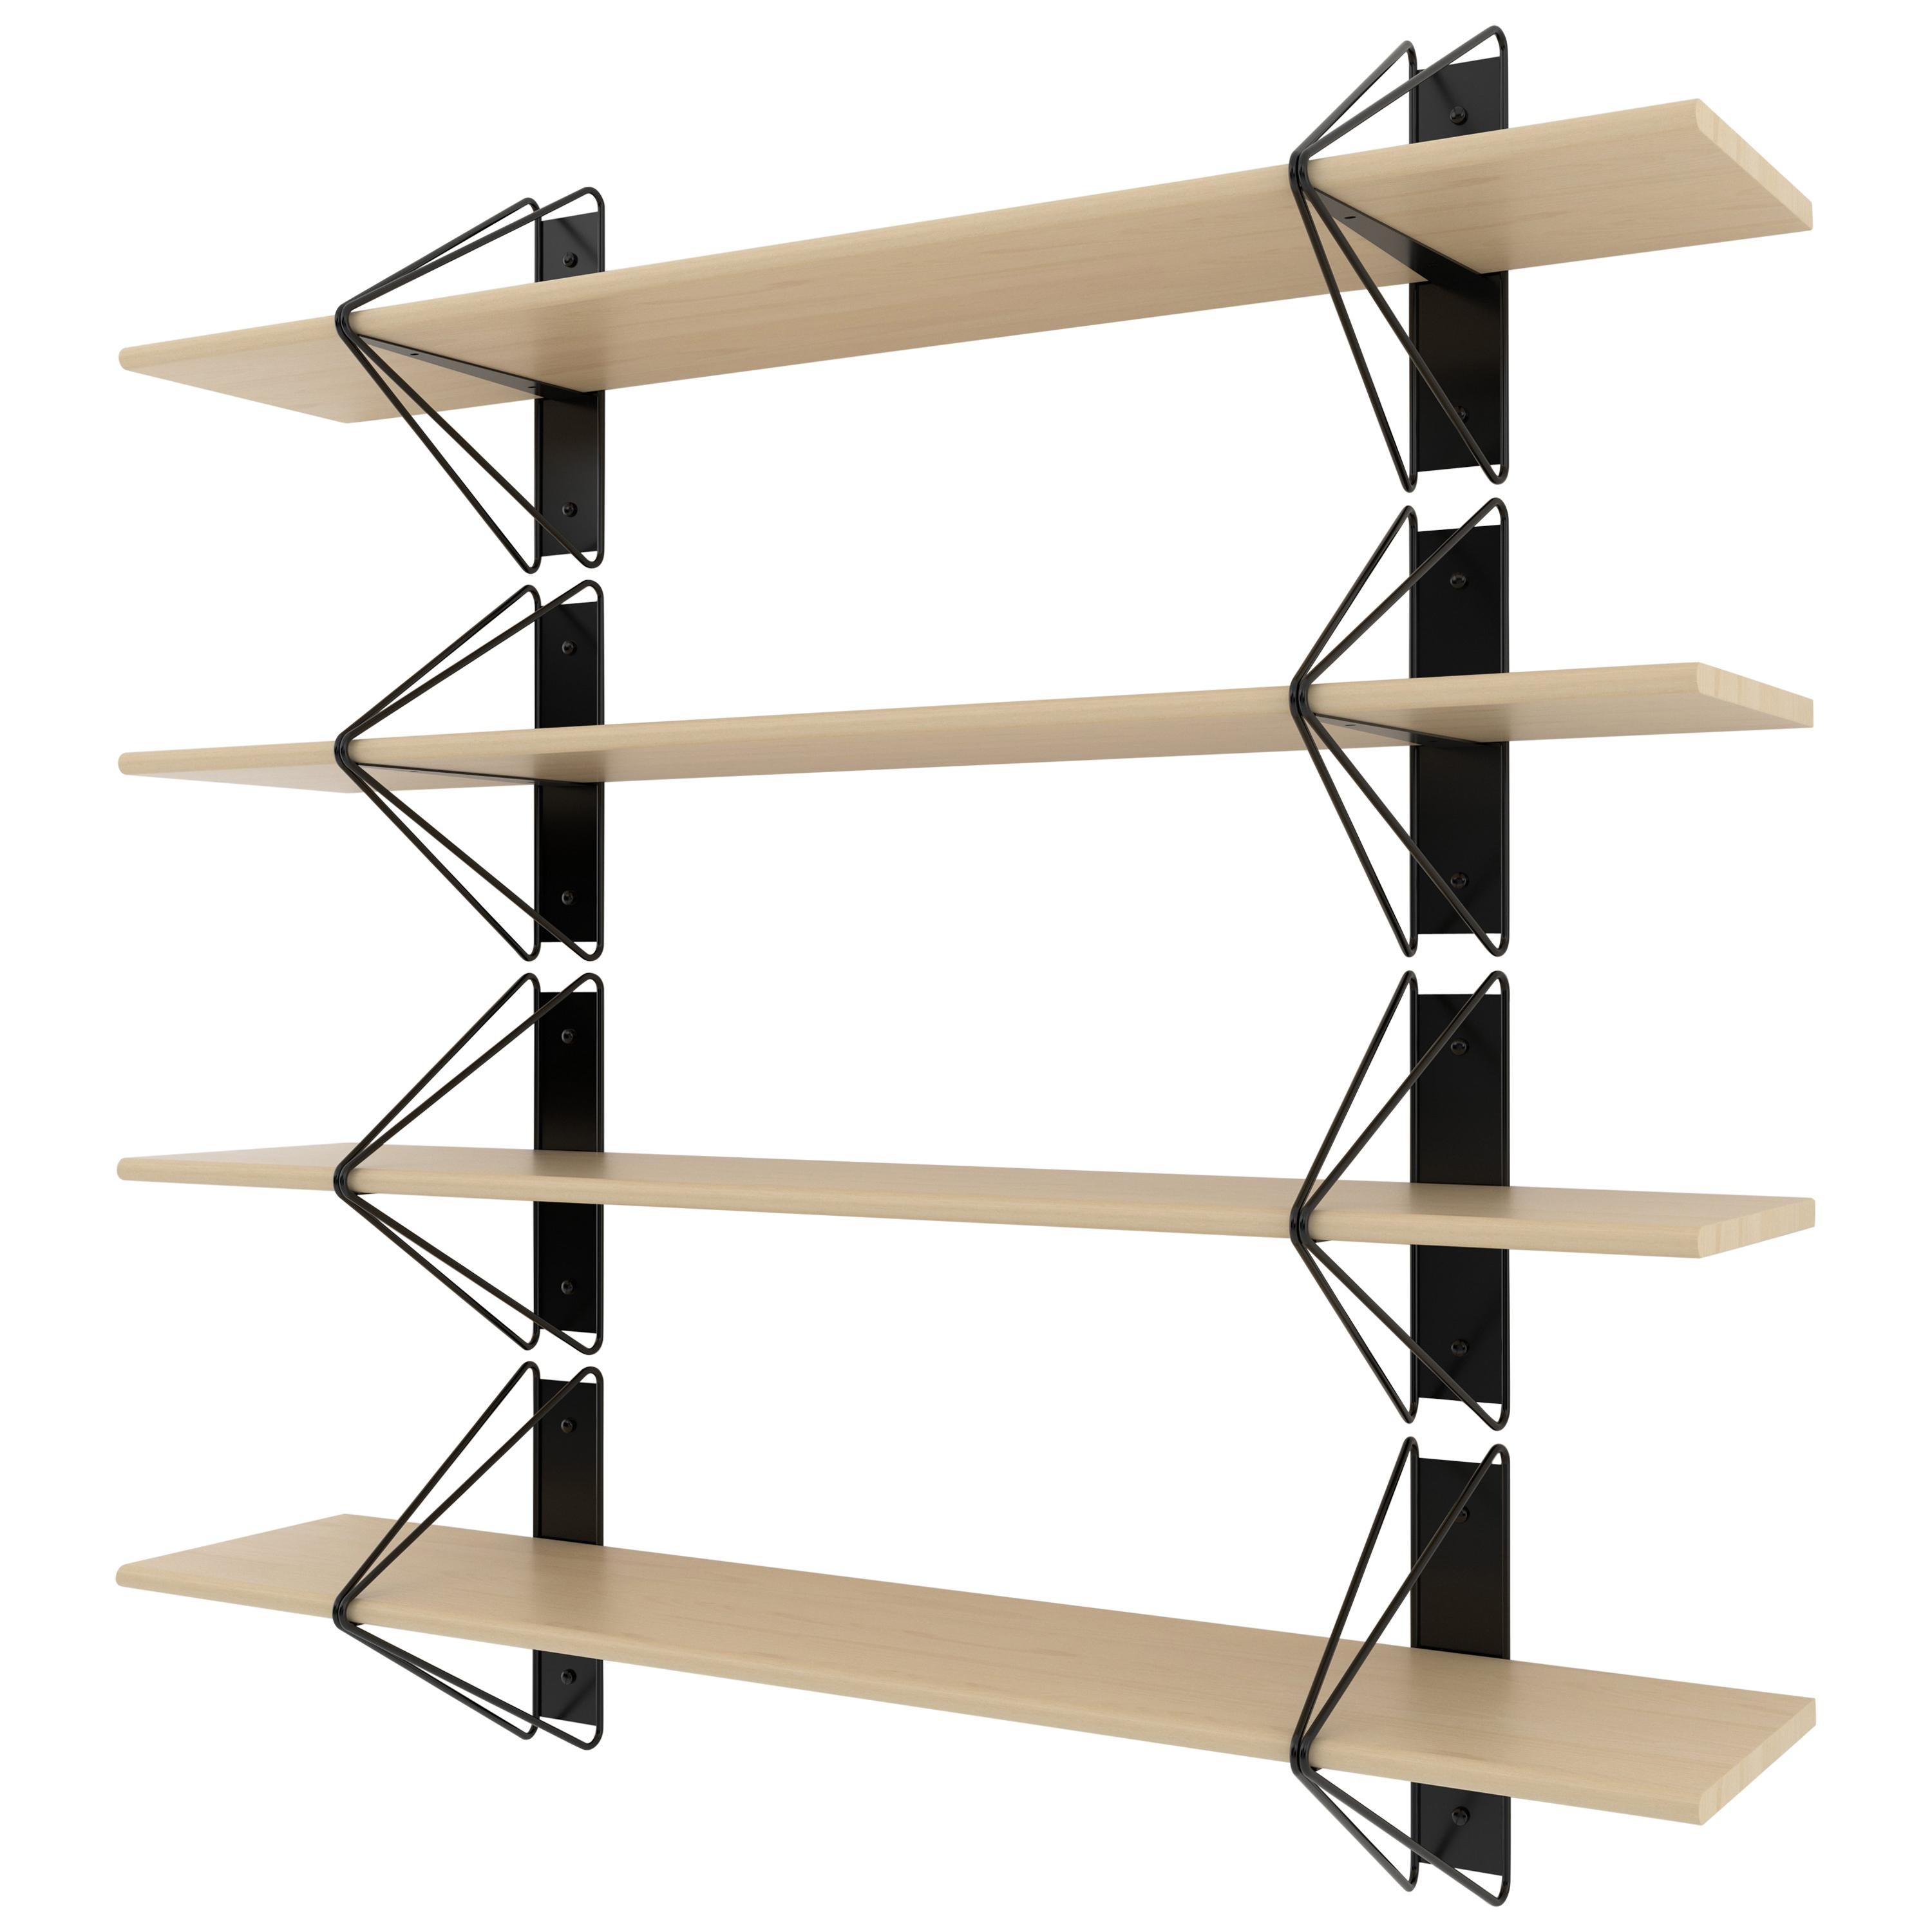 American Set of 3 Strut Shelves from Souda, 116in, Black and Walnut, Made to Order For Sale